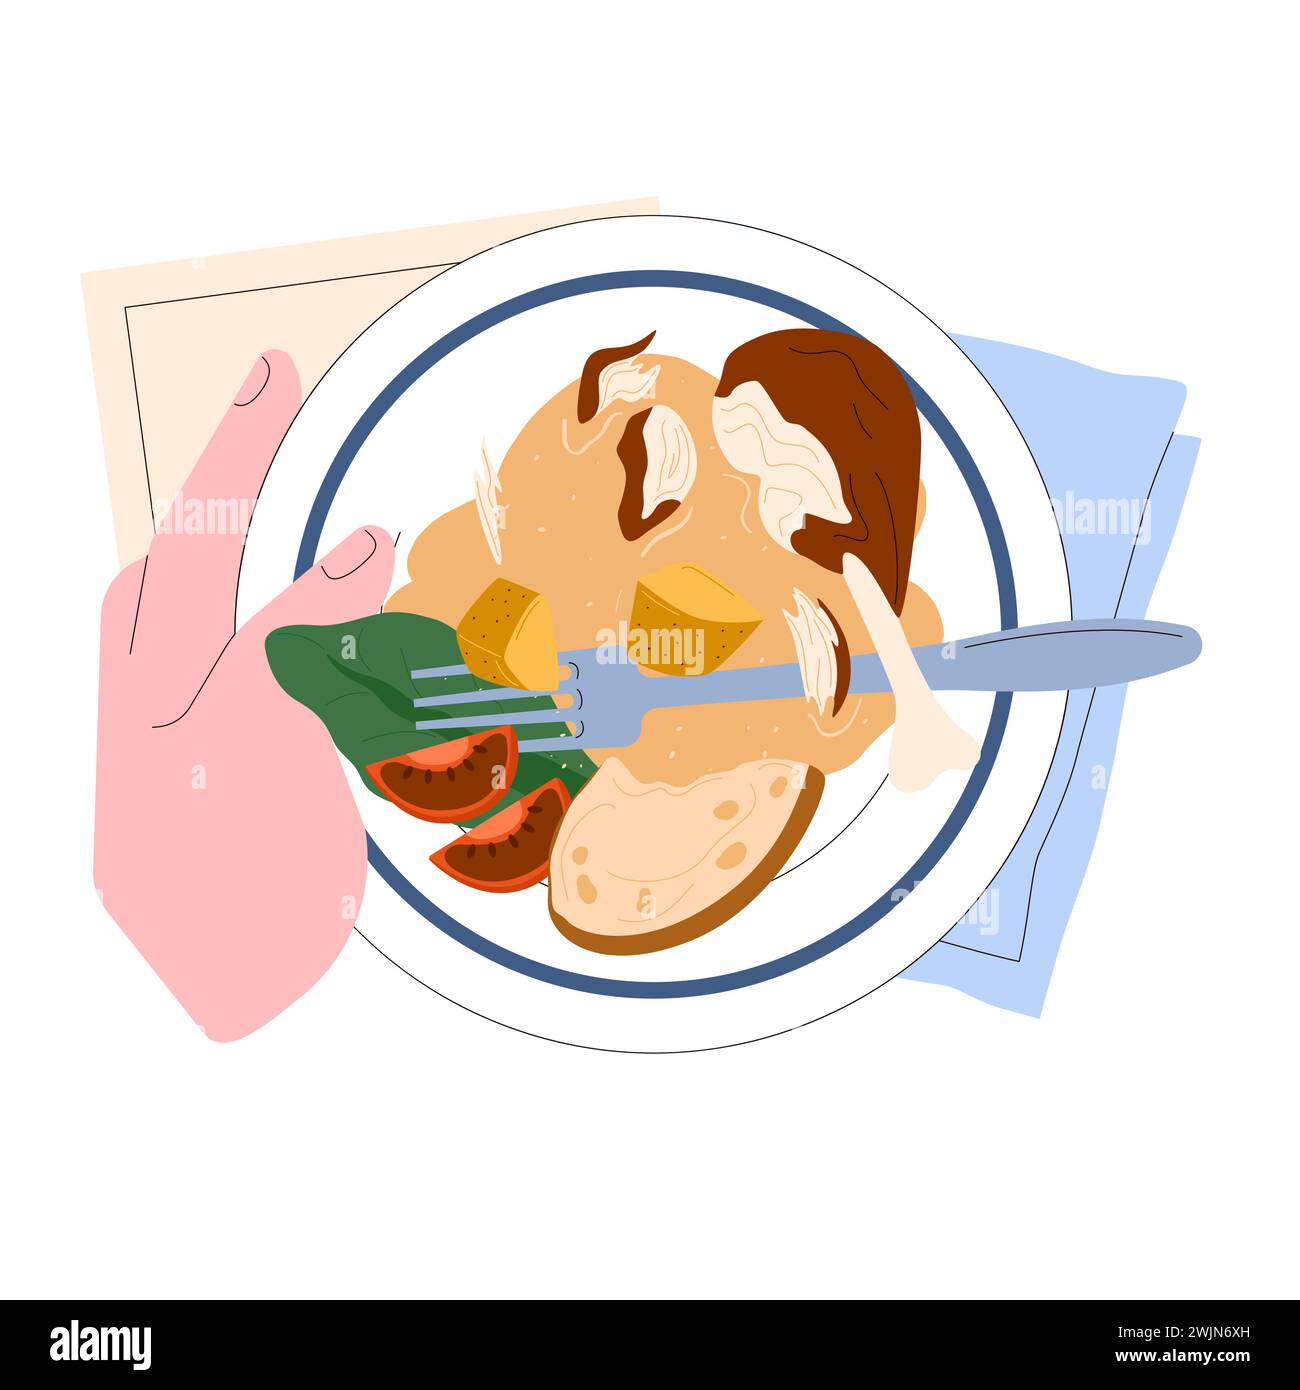 Leftovers. Sustainable cooking, repurpose nextovers to reduce food waste. Meal prep with nextovers on a plate, promoting food waste reduction and efficient home cooking. Flat vector illustration. Stock Vector